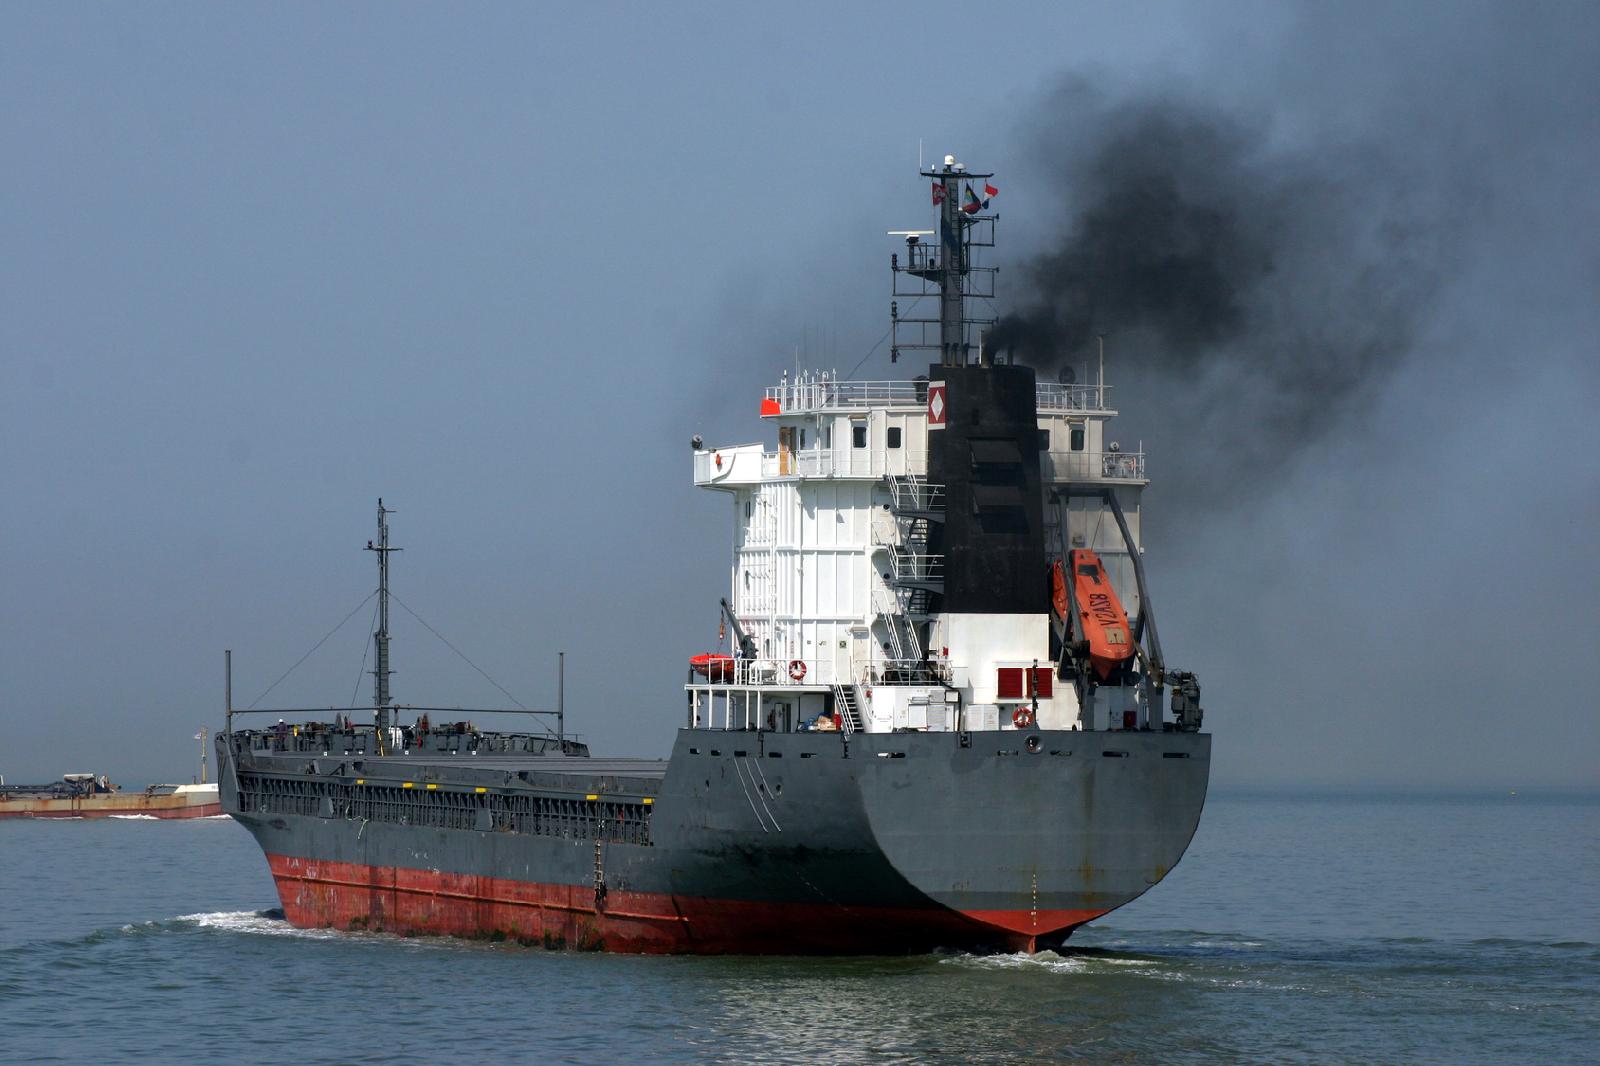 Environmental groups say IMO failing to cap emissions